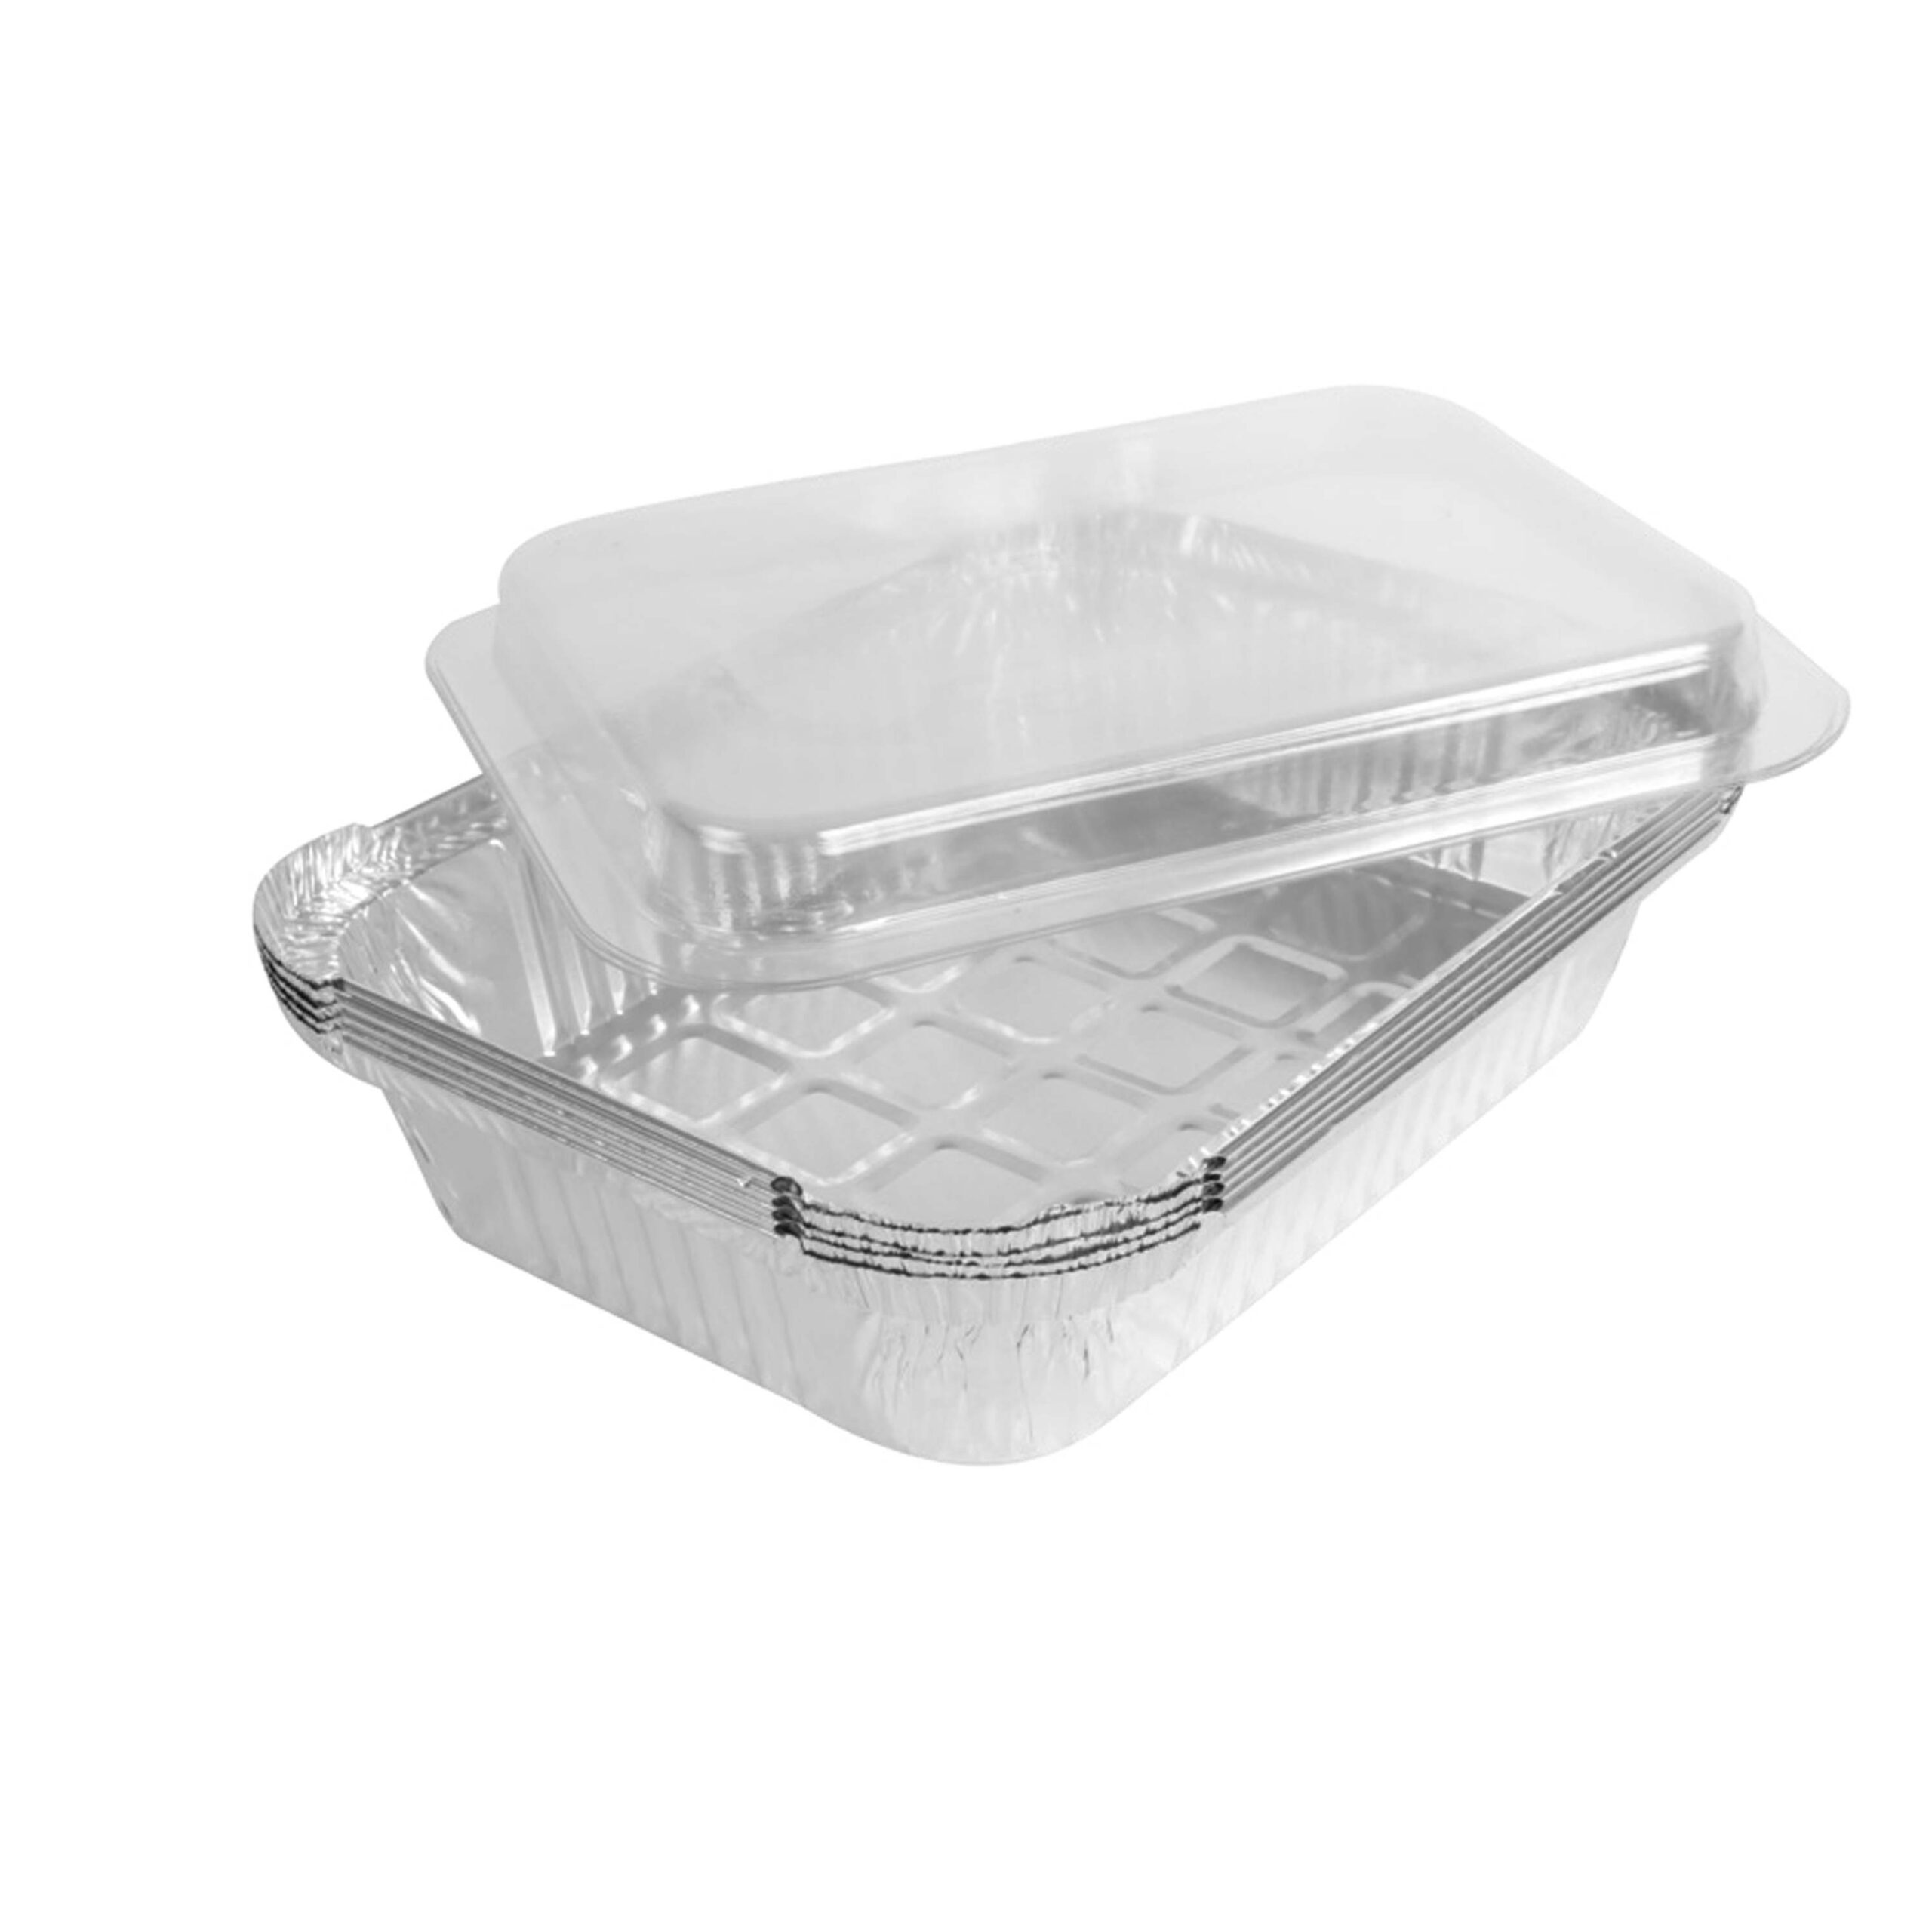 ALUMINIUM CATERING TRAY WITH CLEAR LID 890ml 210x158mm - 1x250